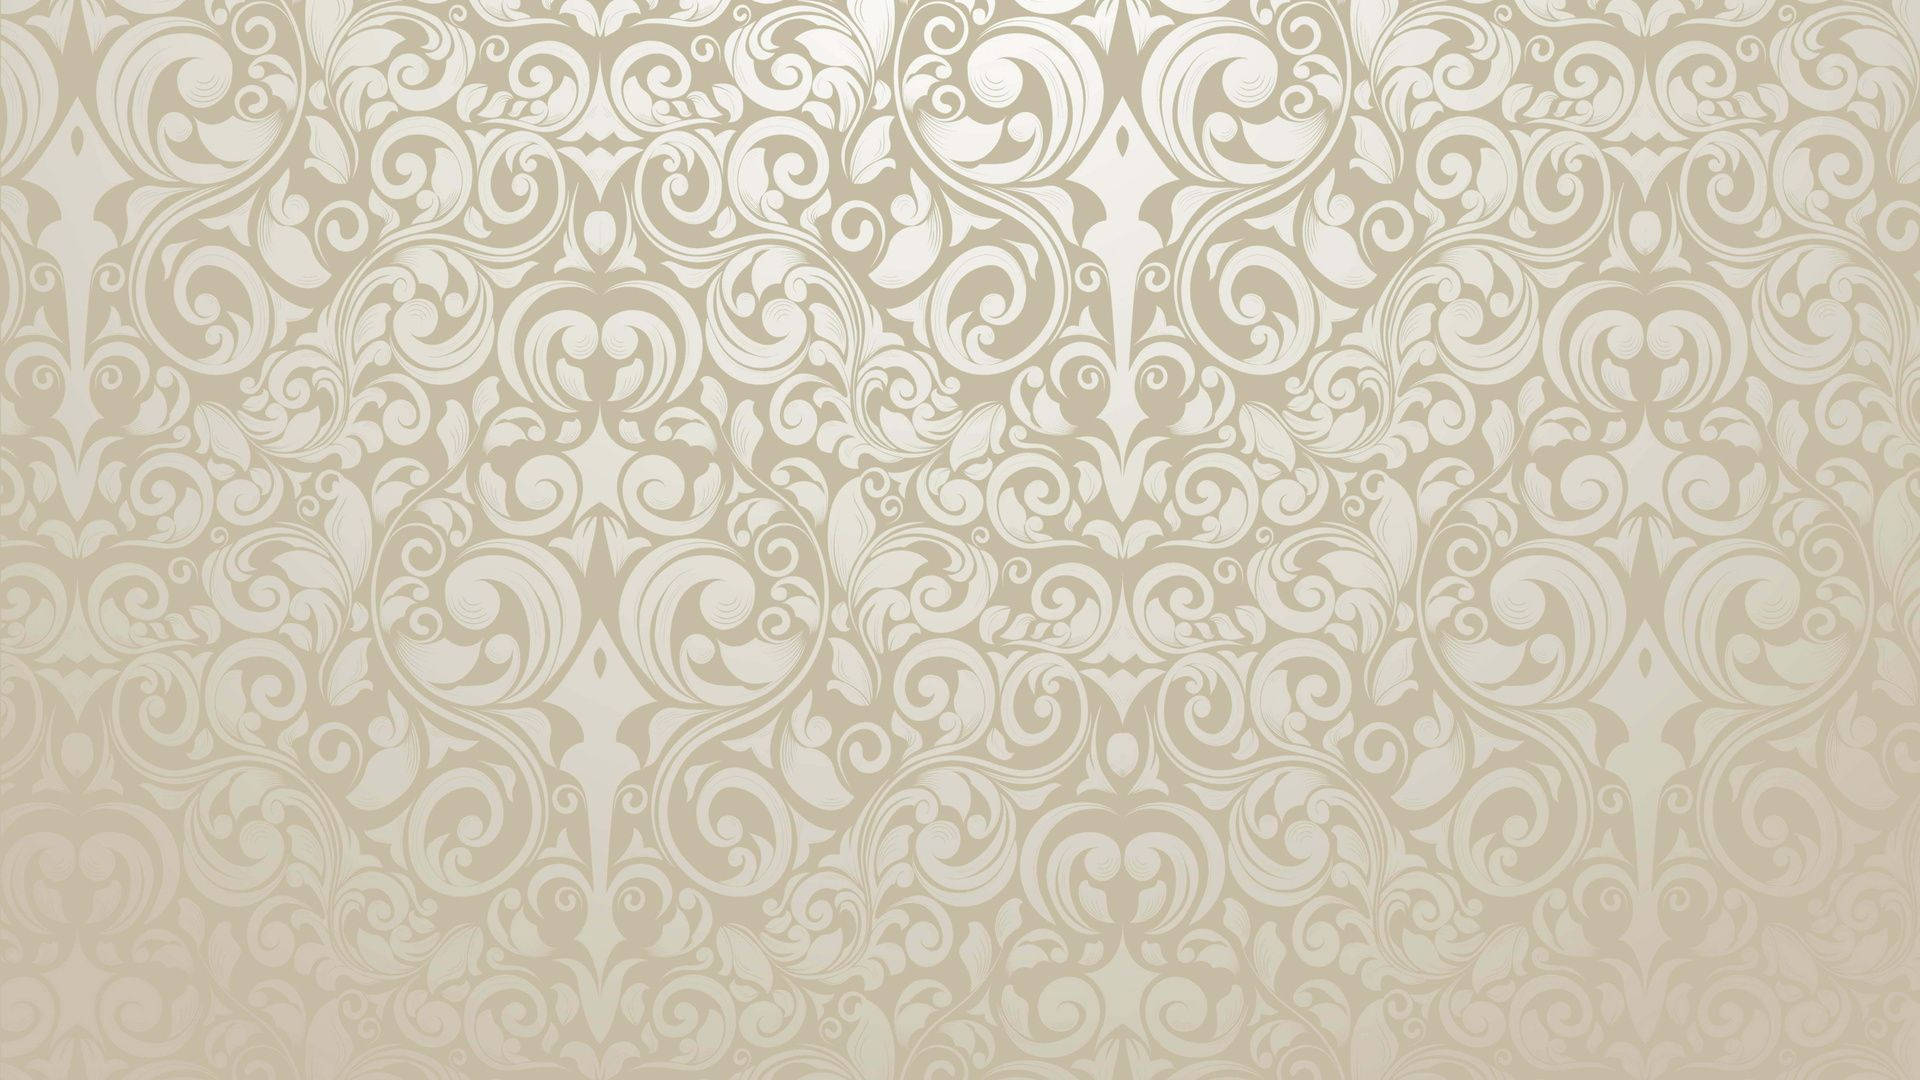 Textured Shiny Vintage Wall Background